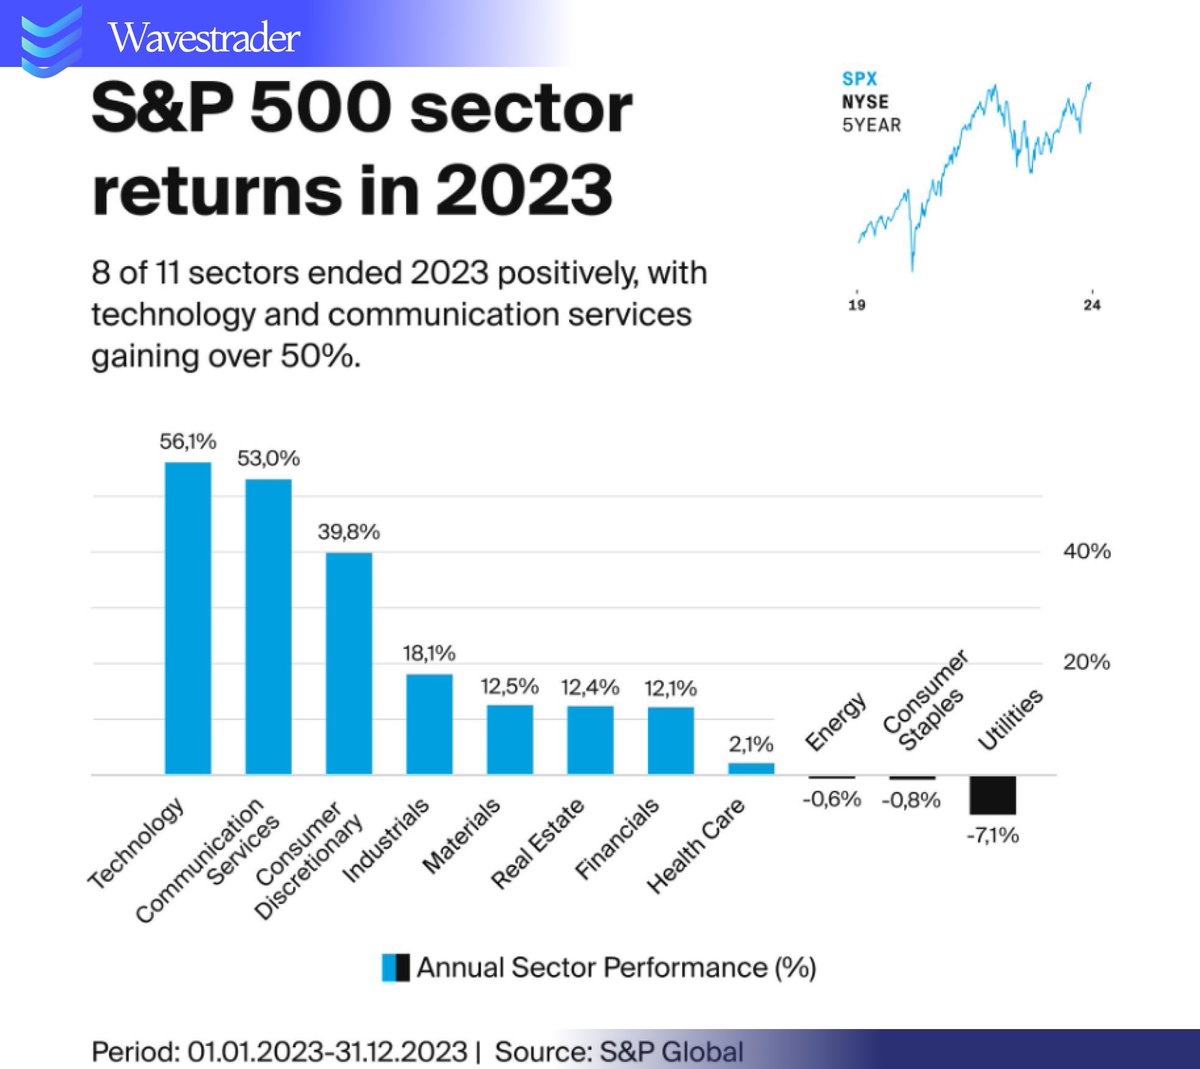 2023 wrapped up with only Energy, Consumer Staples, and Utilities in the red on the S&P 500. 💔 What's your prediction for the star performer in 2024? Share your sector forecast! 🔮#WavesTrader #StockMarket #2024Predictions #Investing